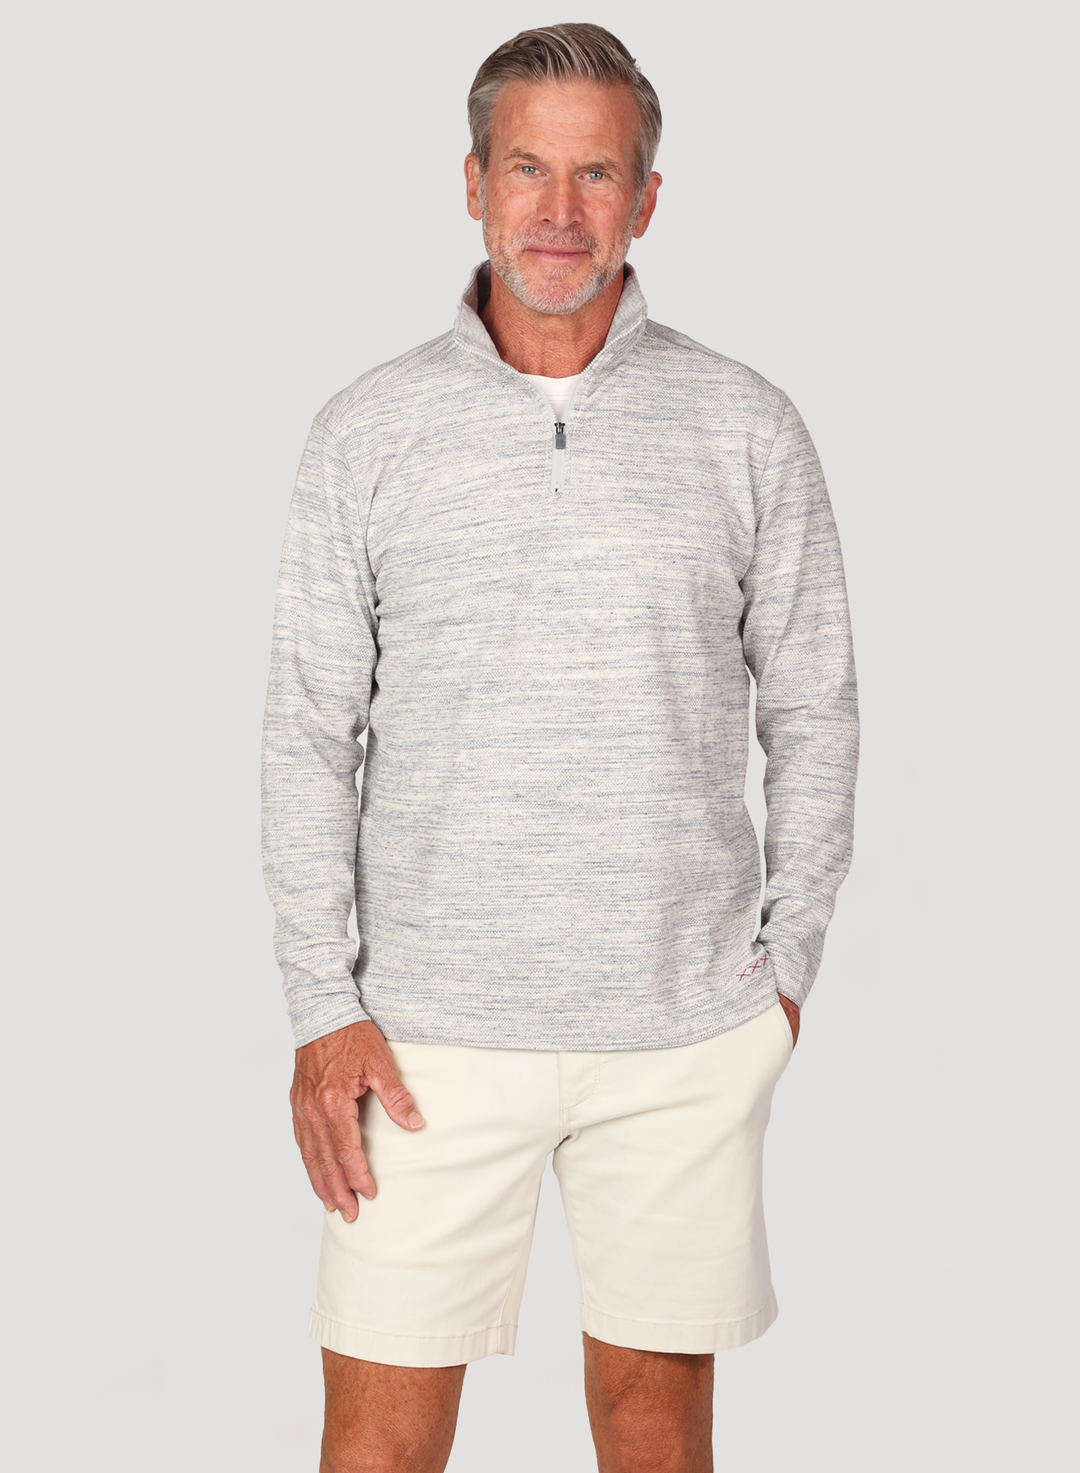 BEACH HOUSE KNITS-HEATHER GREY - Kingfisher Road - Online Boutique